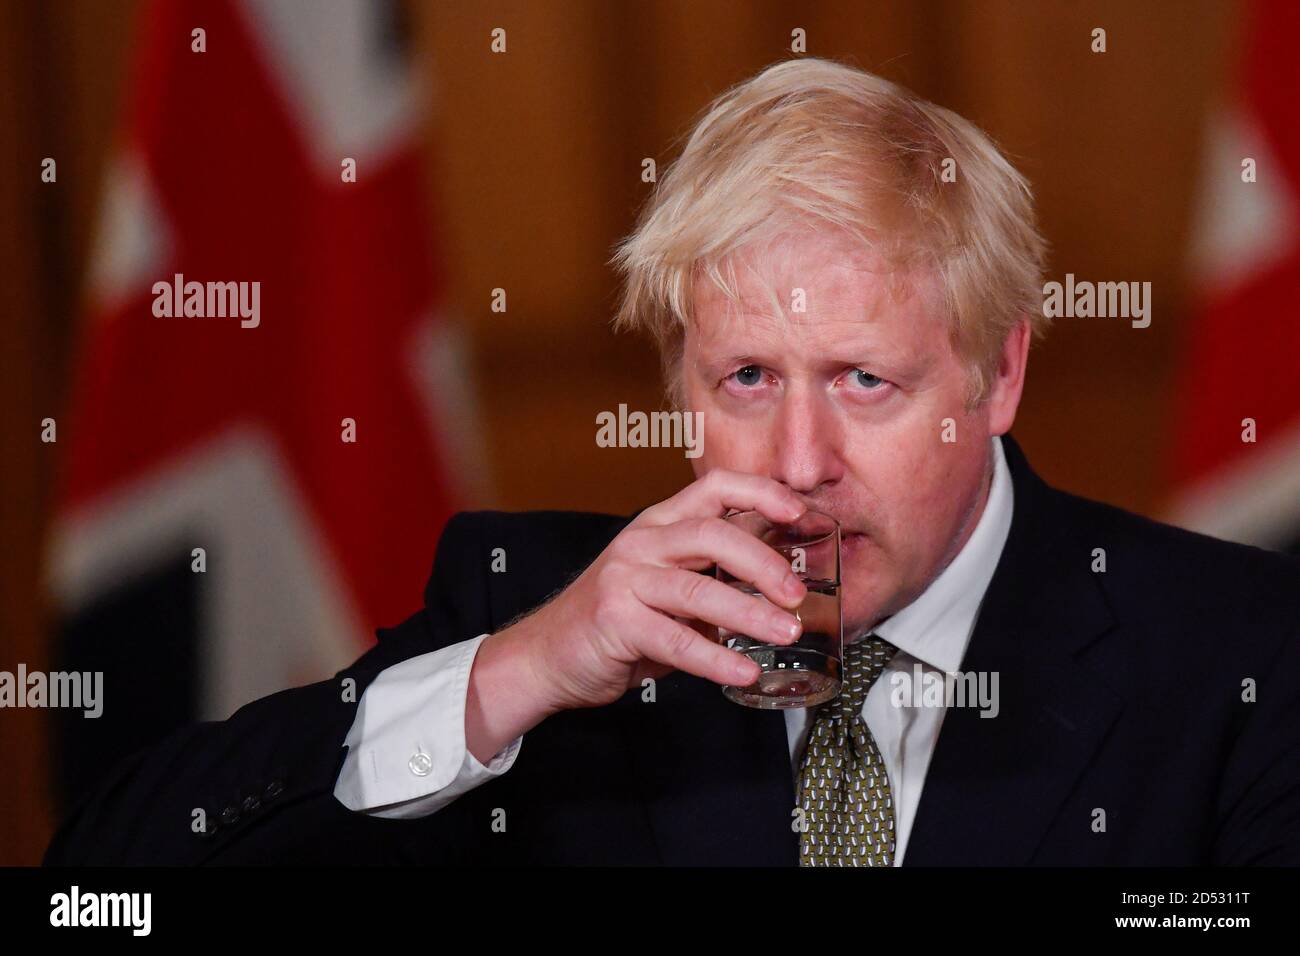 Prime Minister Boris Johnson drinks water during a media briefing in Downing Street, London, on coronavirus (COVID-19). Stock Photo